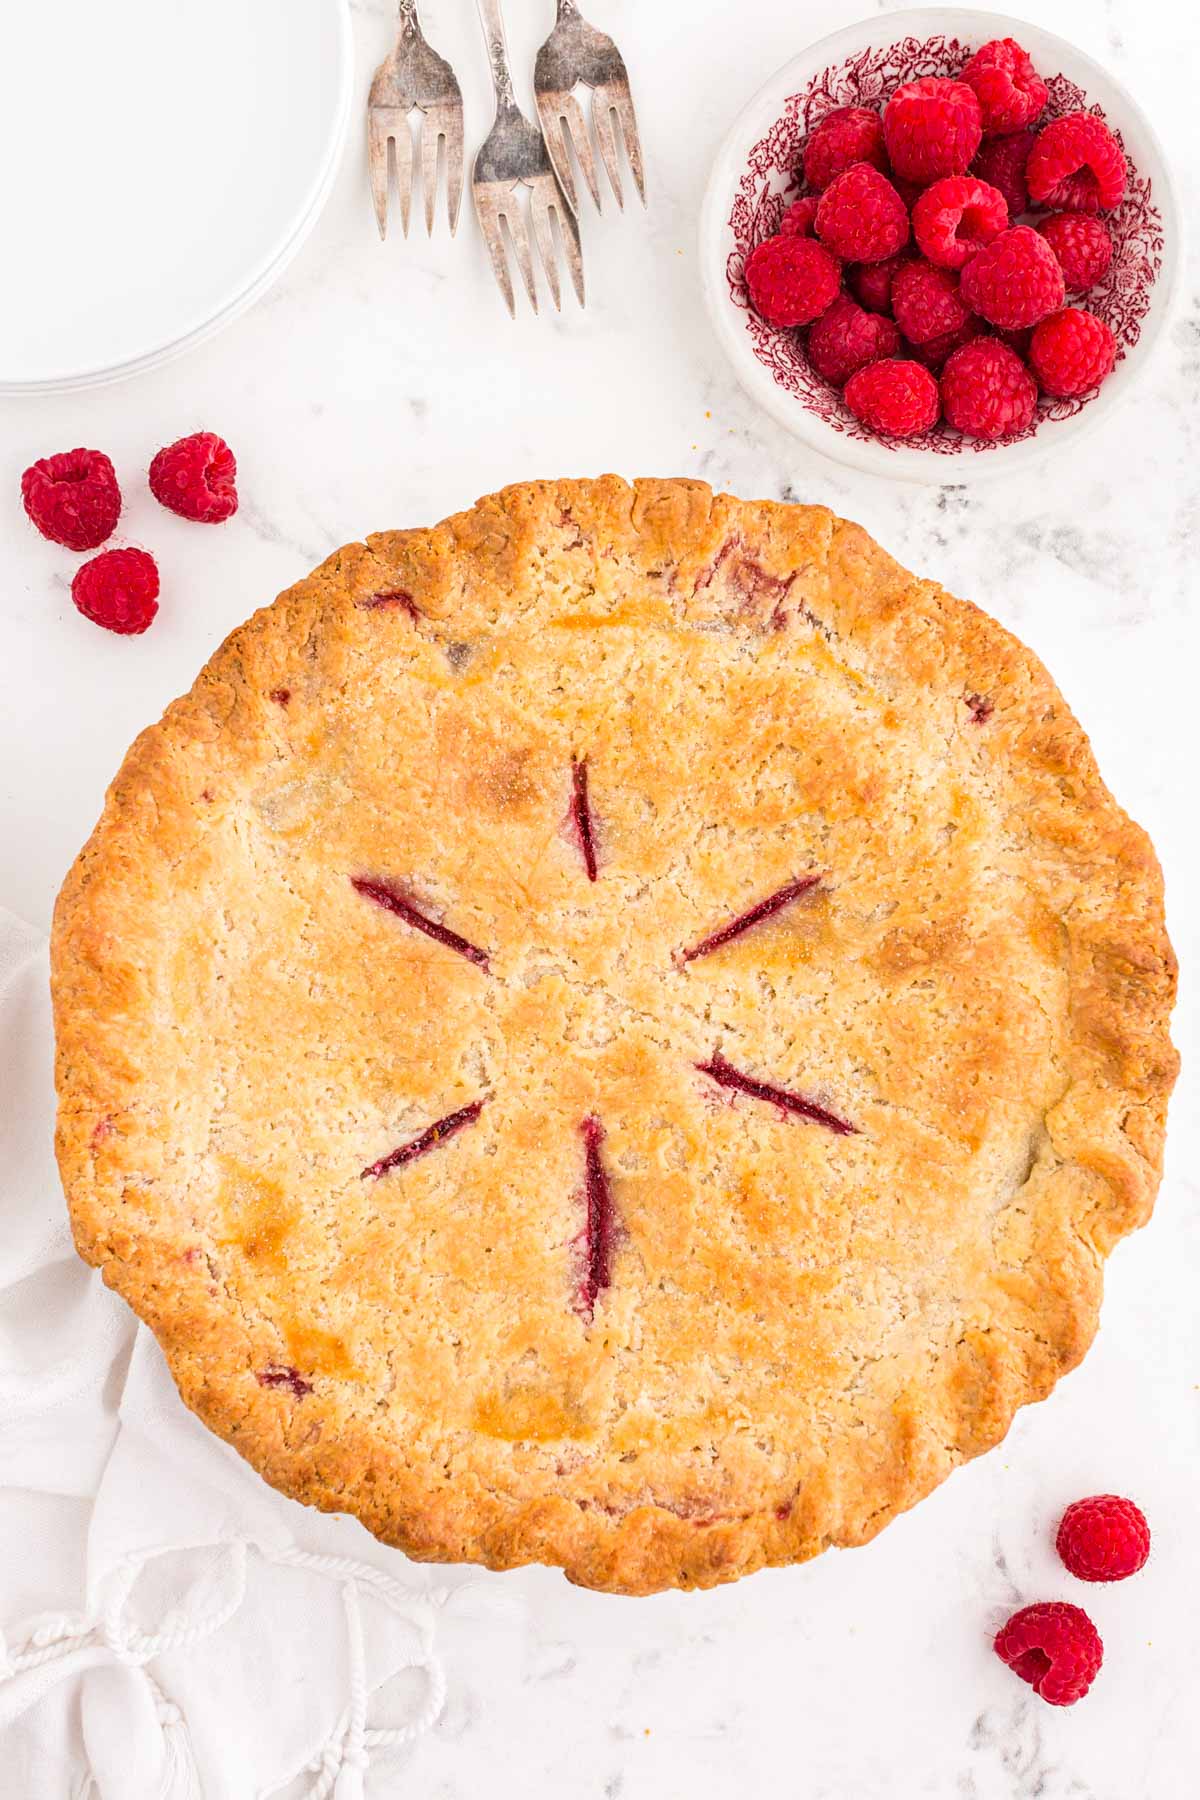 Overhead photo of a whole raspberry pie on a white table with raspberries around it.